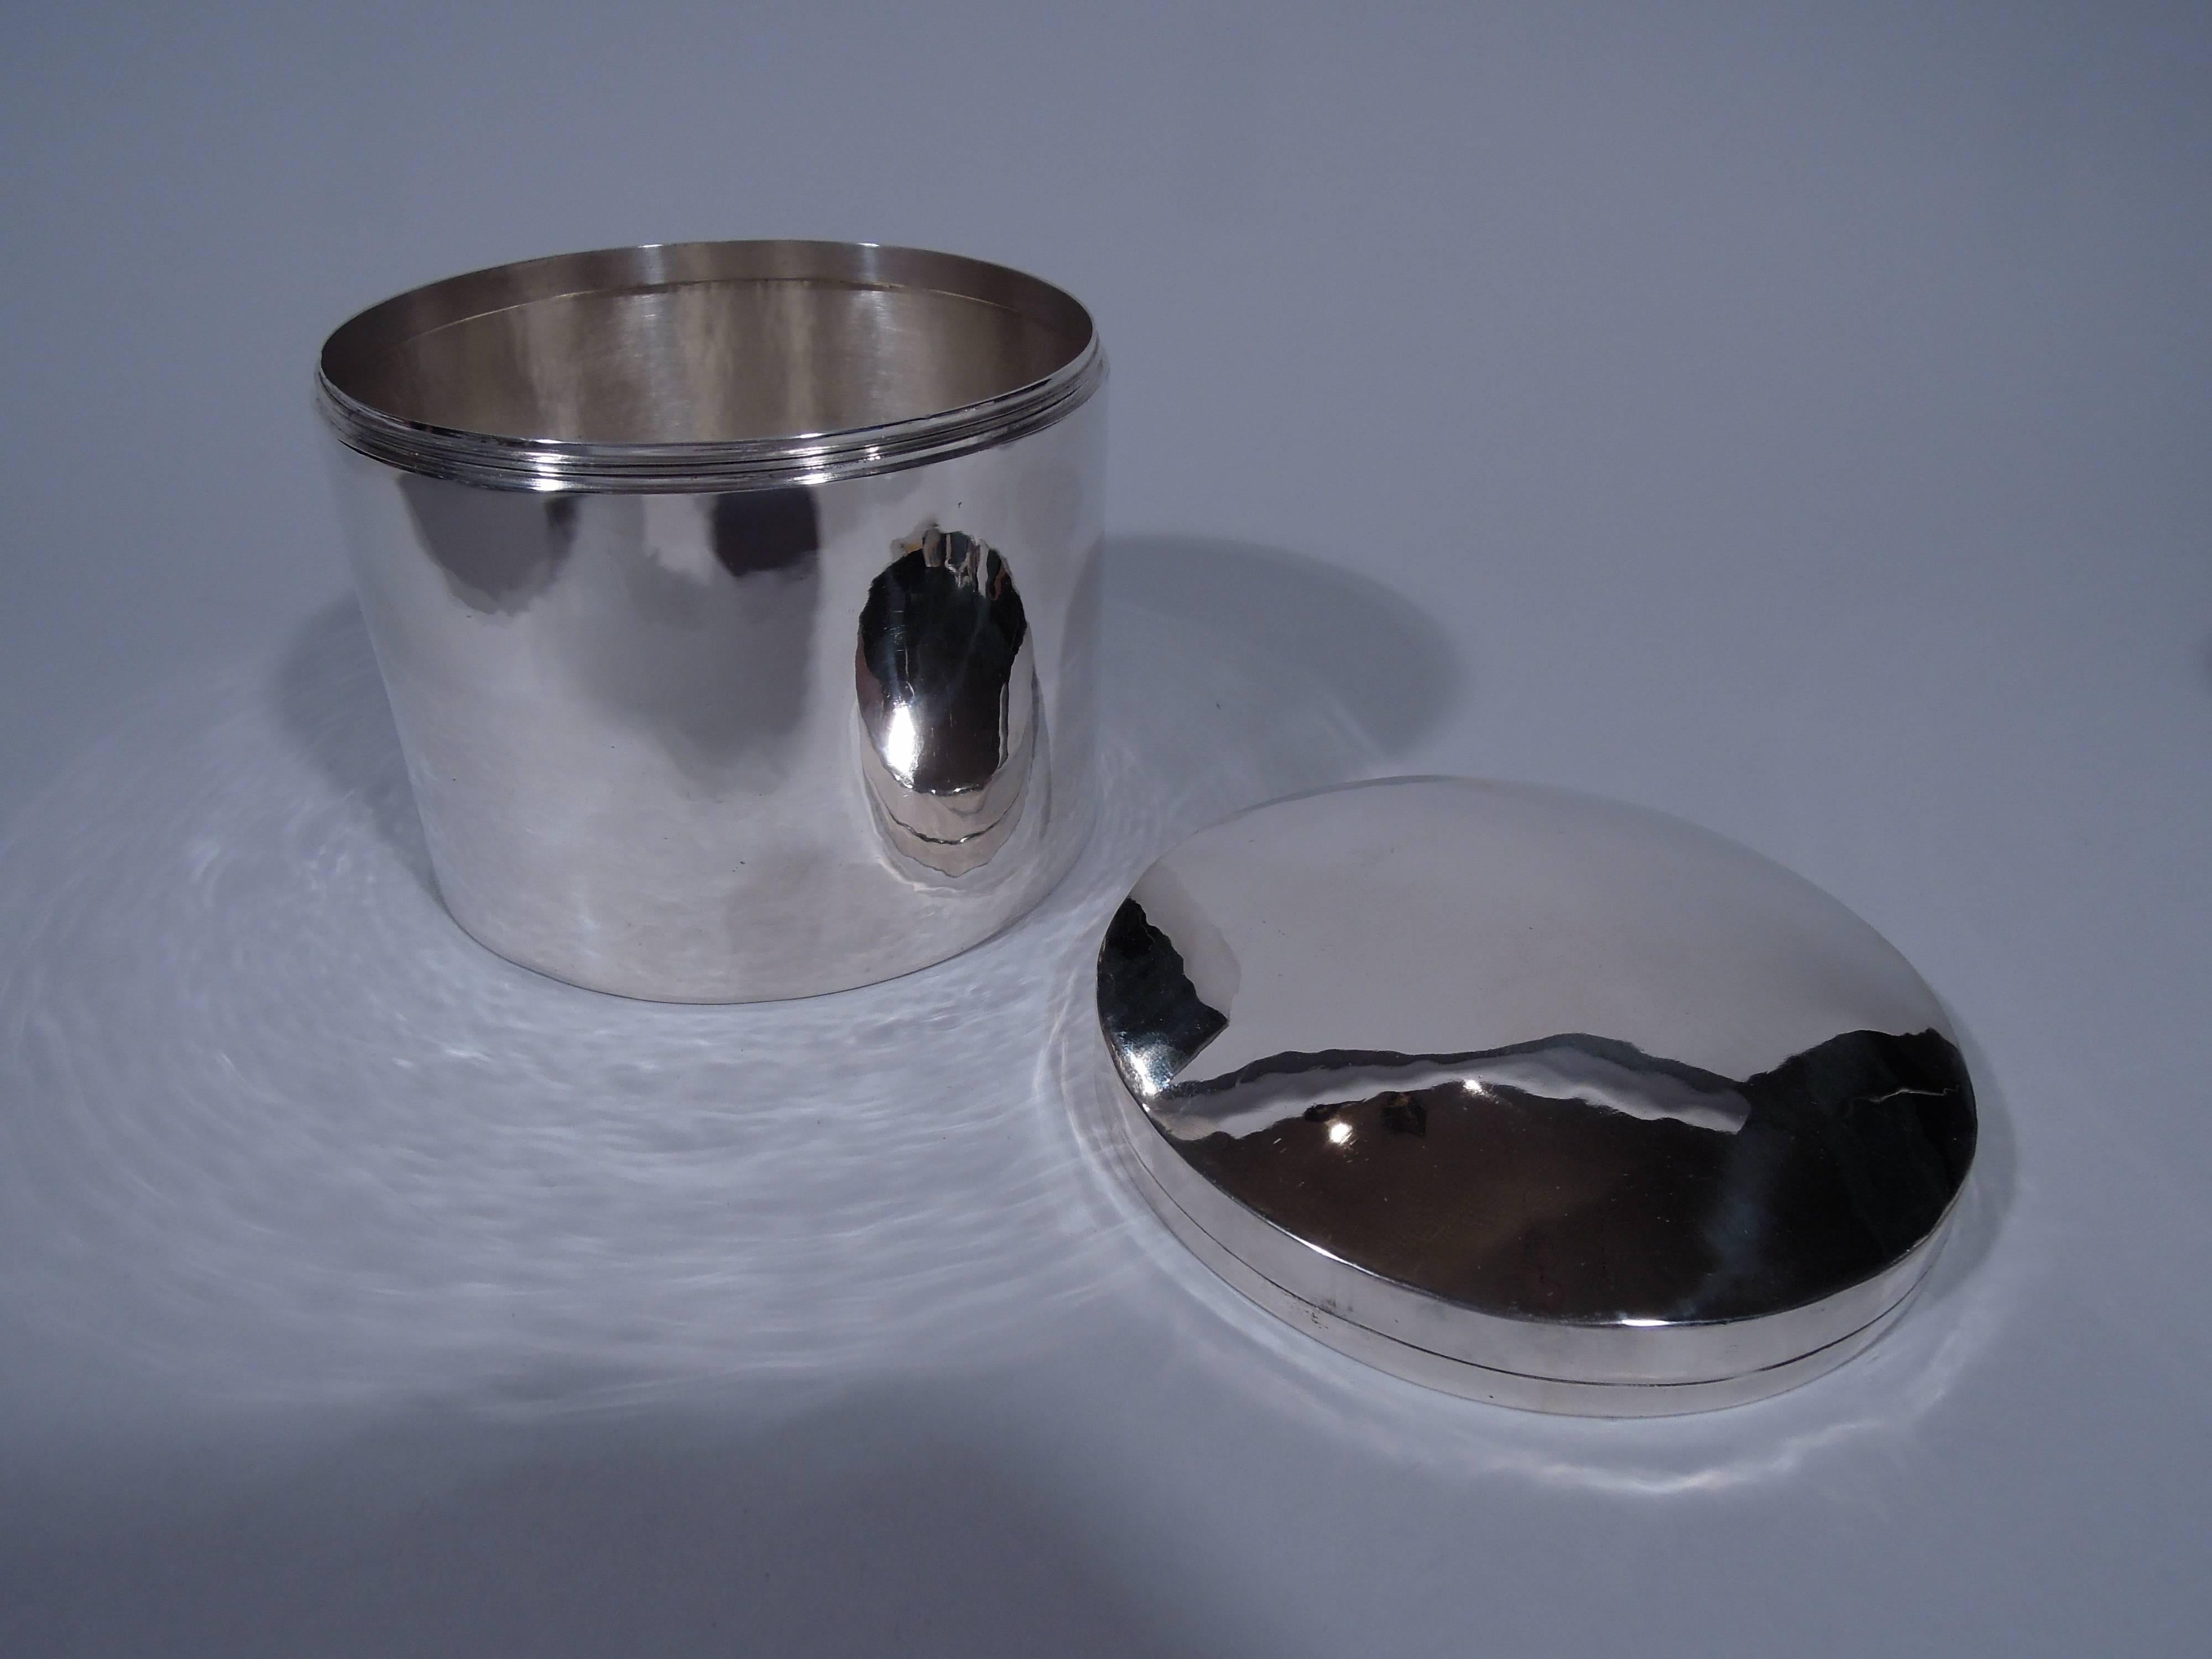 Sterling silver box. Made by Kalo Shop in Chicago, circa 1920. Drum-form with straight sides. Cover threaded and gently curved with incised rim band. A second band formed from cover and box seam. An economical design with fine hand-hammering. Enough